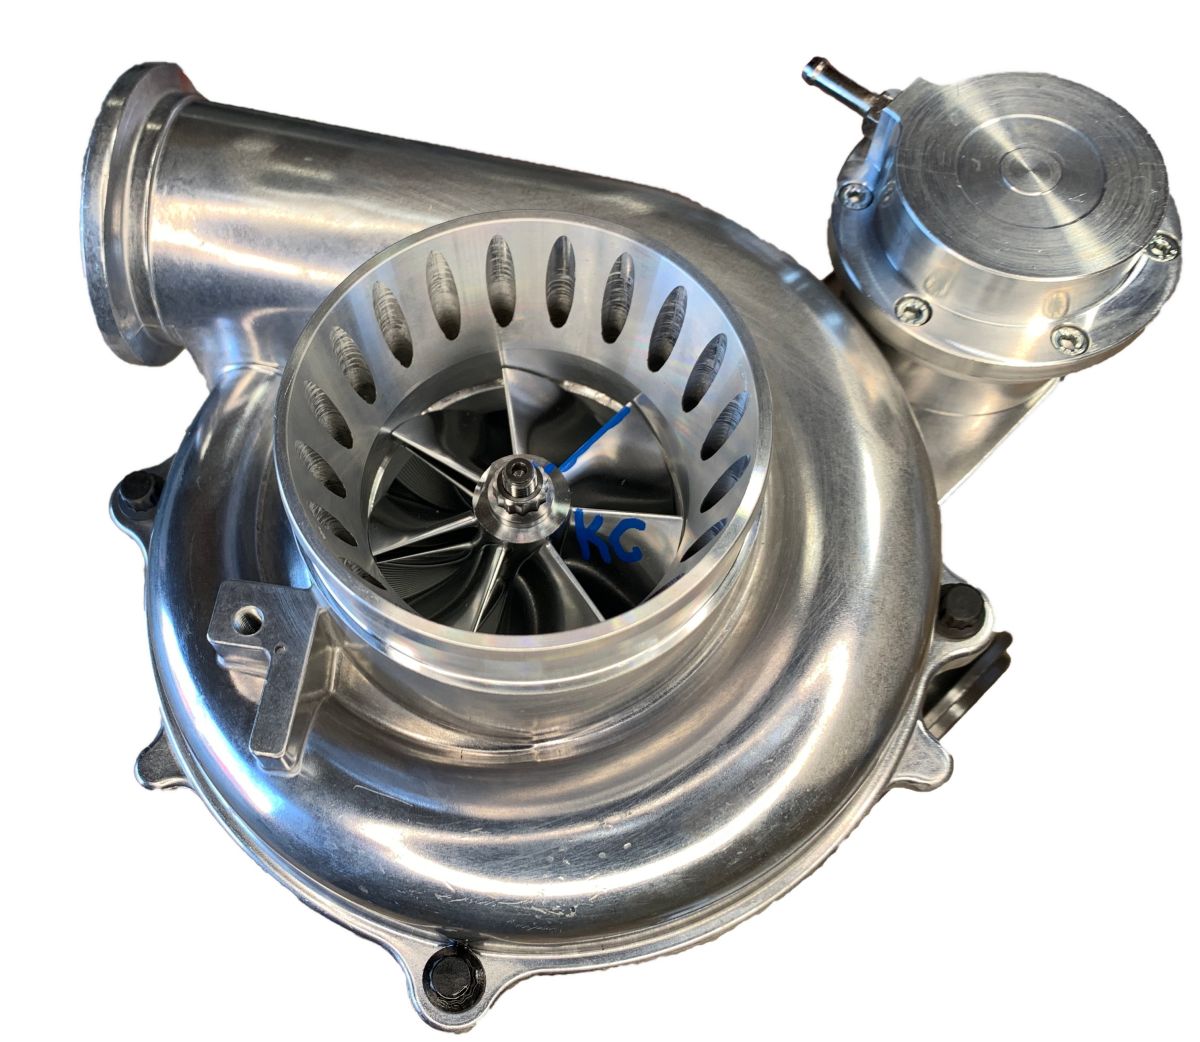 KC Turbos - KC Turbos KC300X 63/68 Turbo .84 A/R For Early 99 7.3 Powerstroke